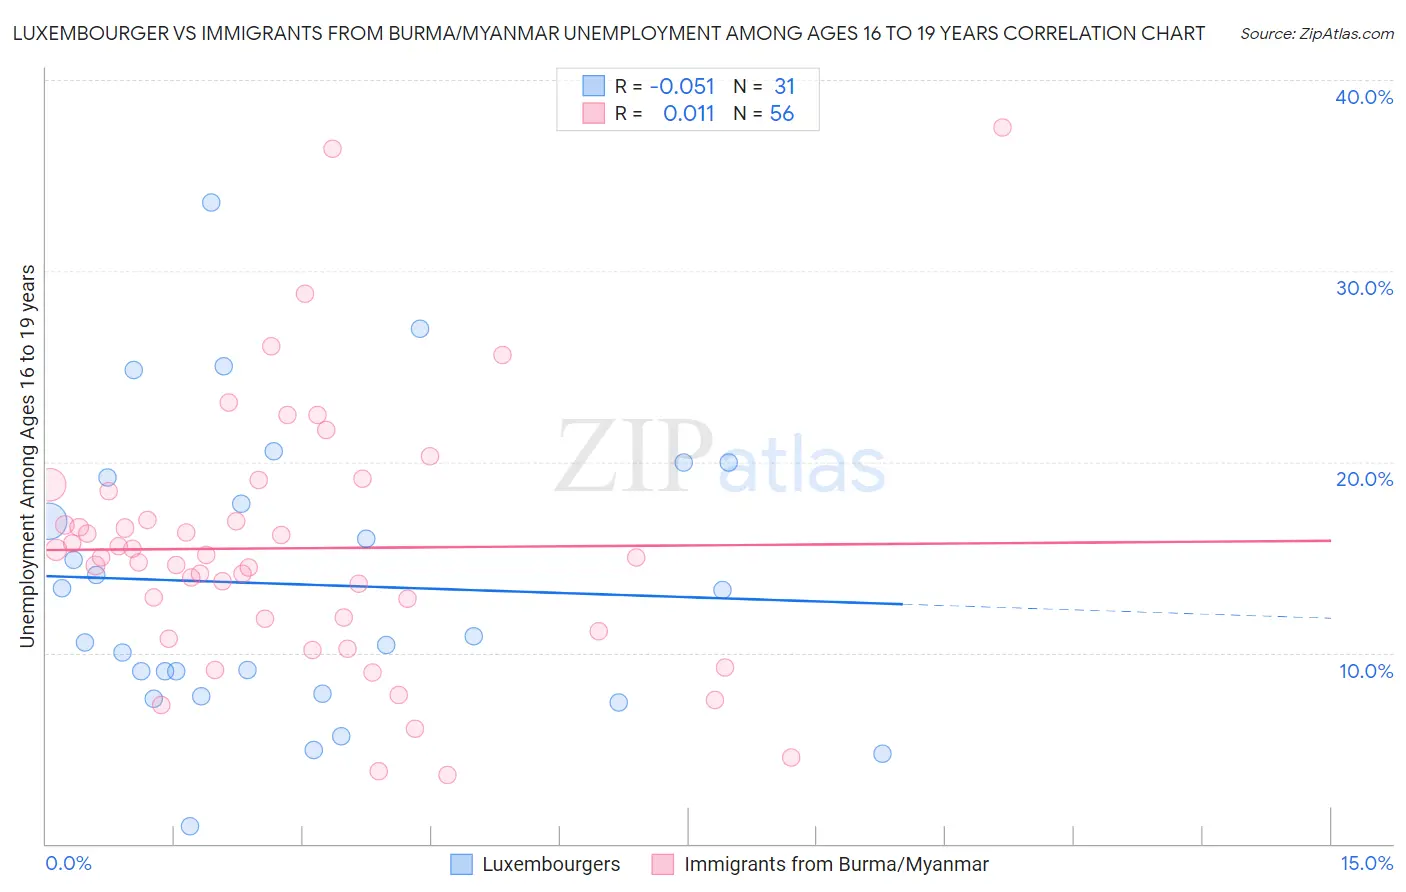 Luxembourger vs Immigrants from Burma/Myanmar Unemployment Among Ages 16 to 19 years